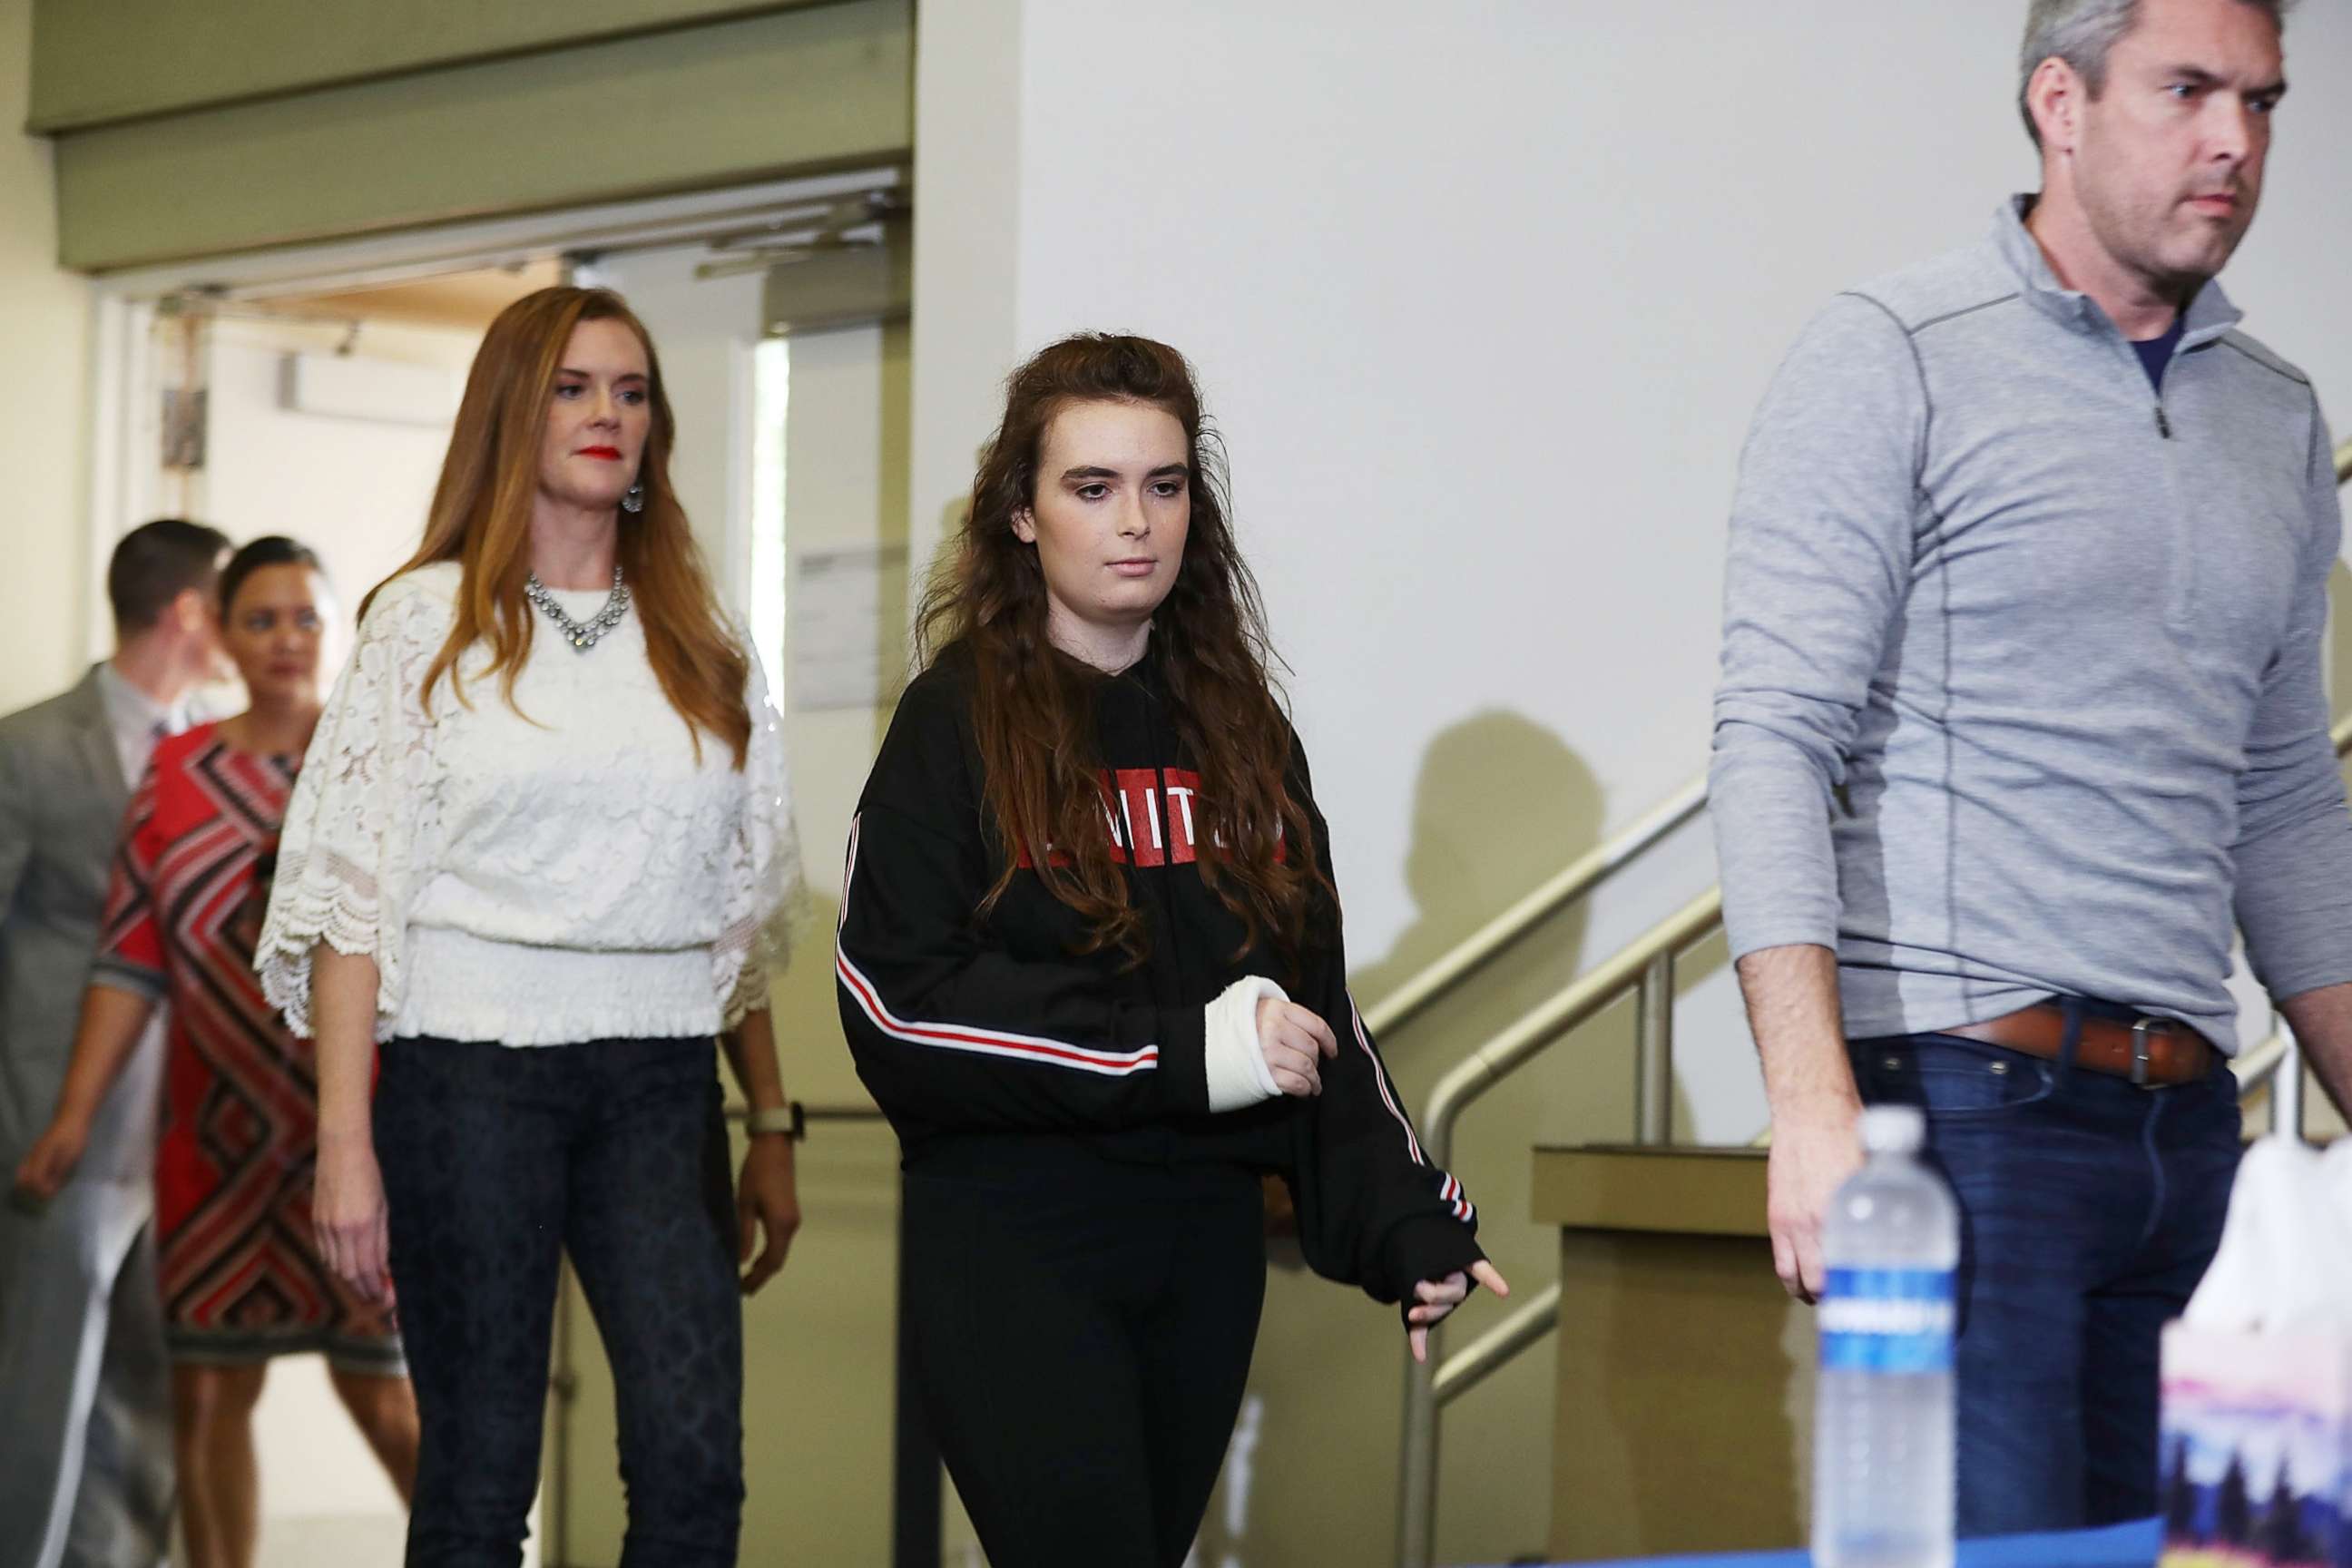 PHOTO: Maddy  Wilford arrives with her parents to speak with the media at Broward Health North where she was treated when she was shot multiple times at Marjory Stoneman Douglas High School, Feb. 26, 2018 in Deerfield Beach, Fla.